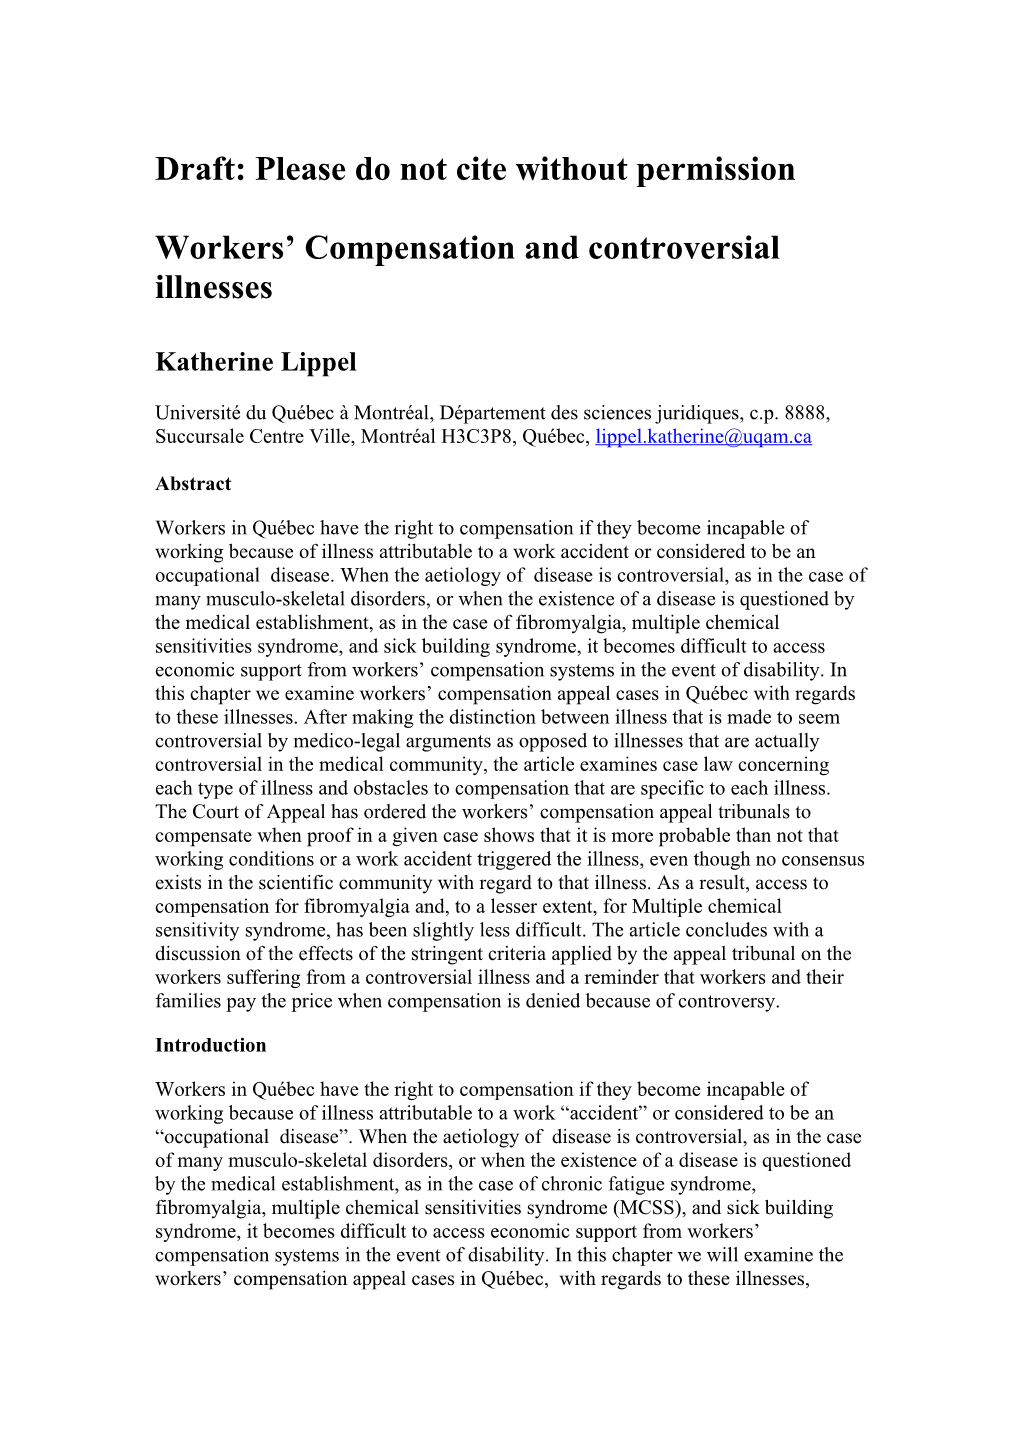 Workers’ Compensation For Controversial Illnesses